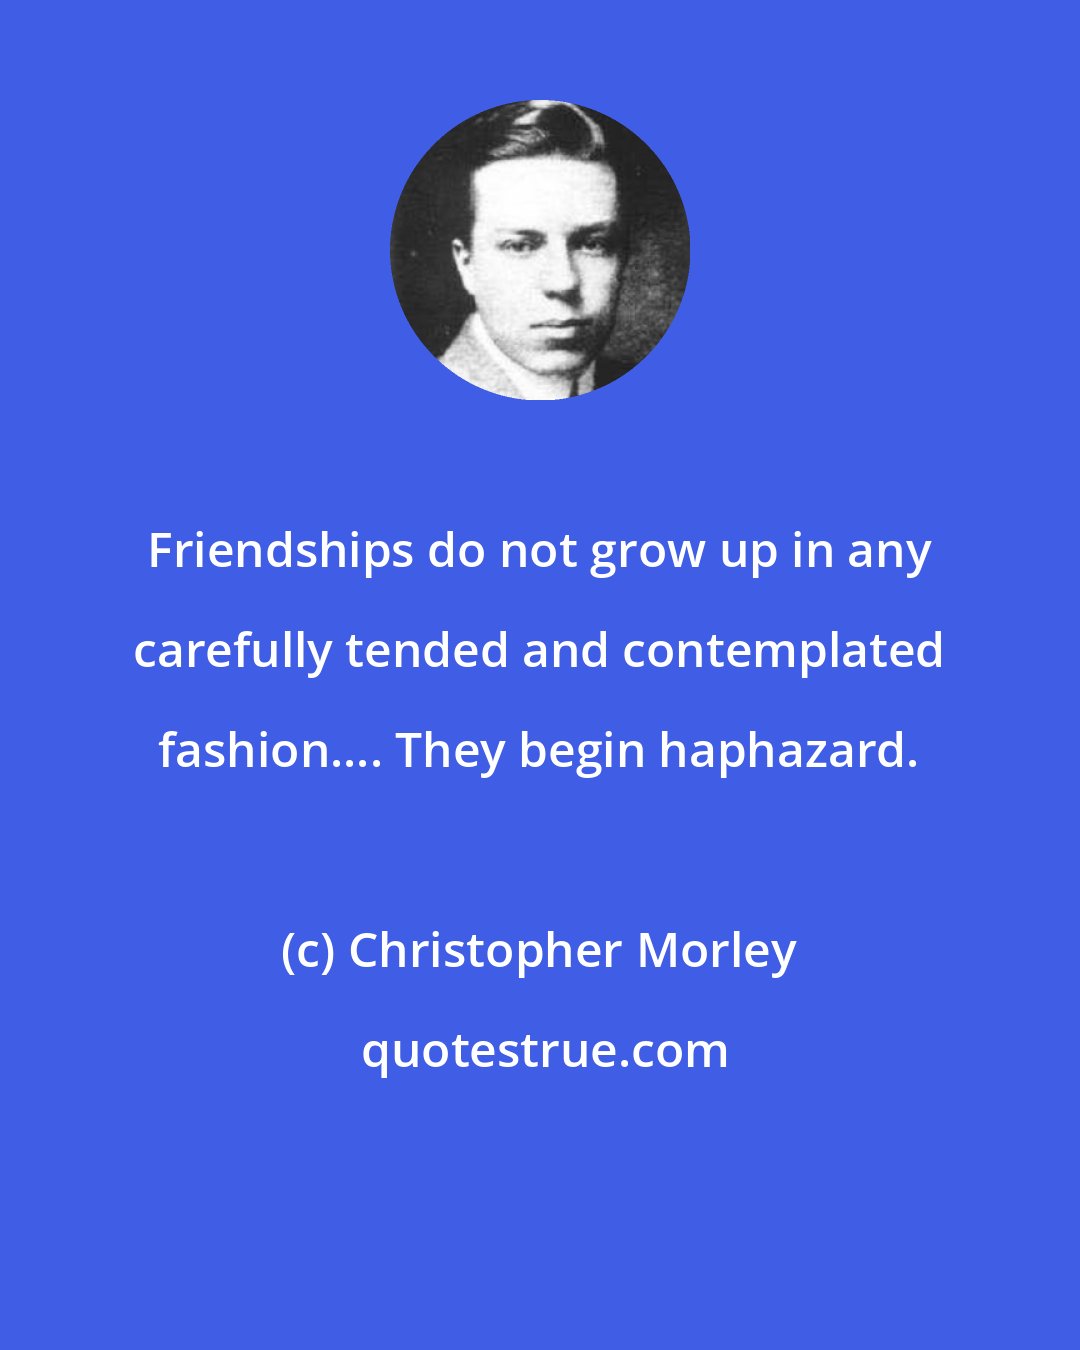 Christopher Morley: Friendships do not grow up in any carefully tended and contemplated fashion.... They begin haphazard.